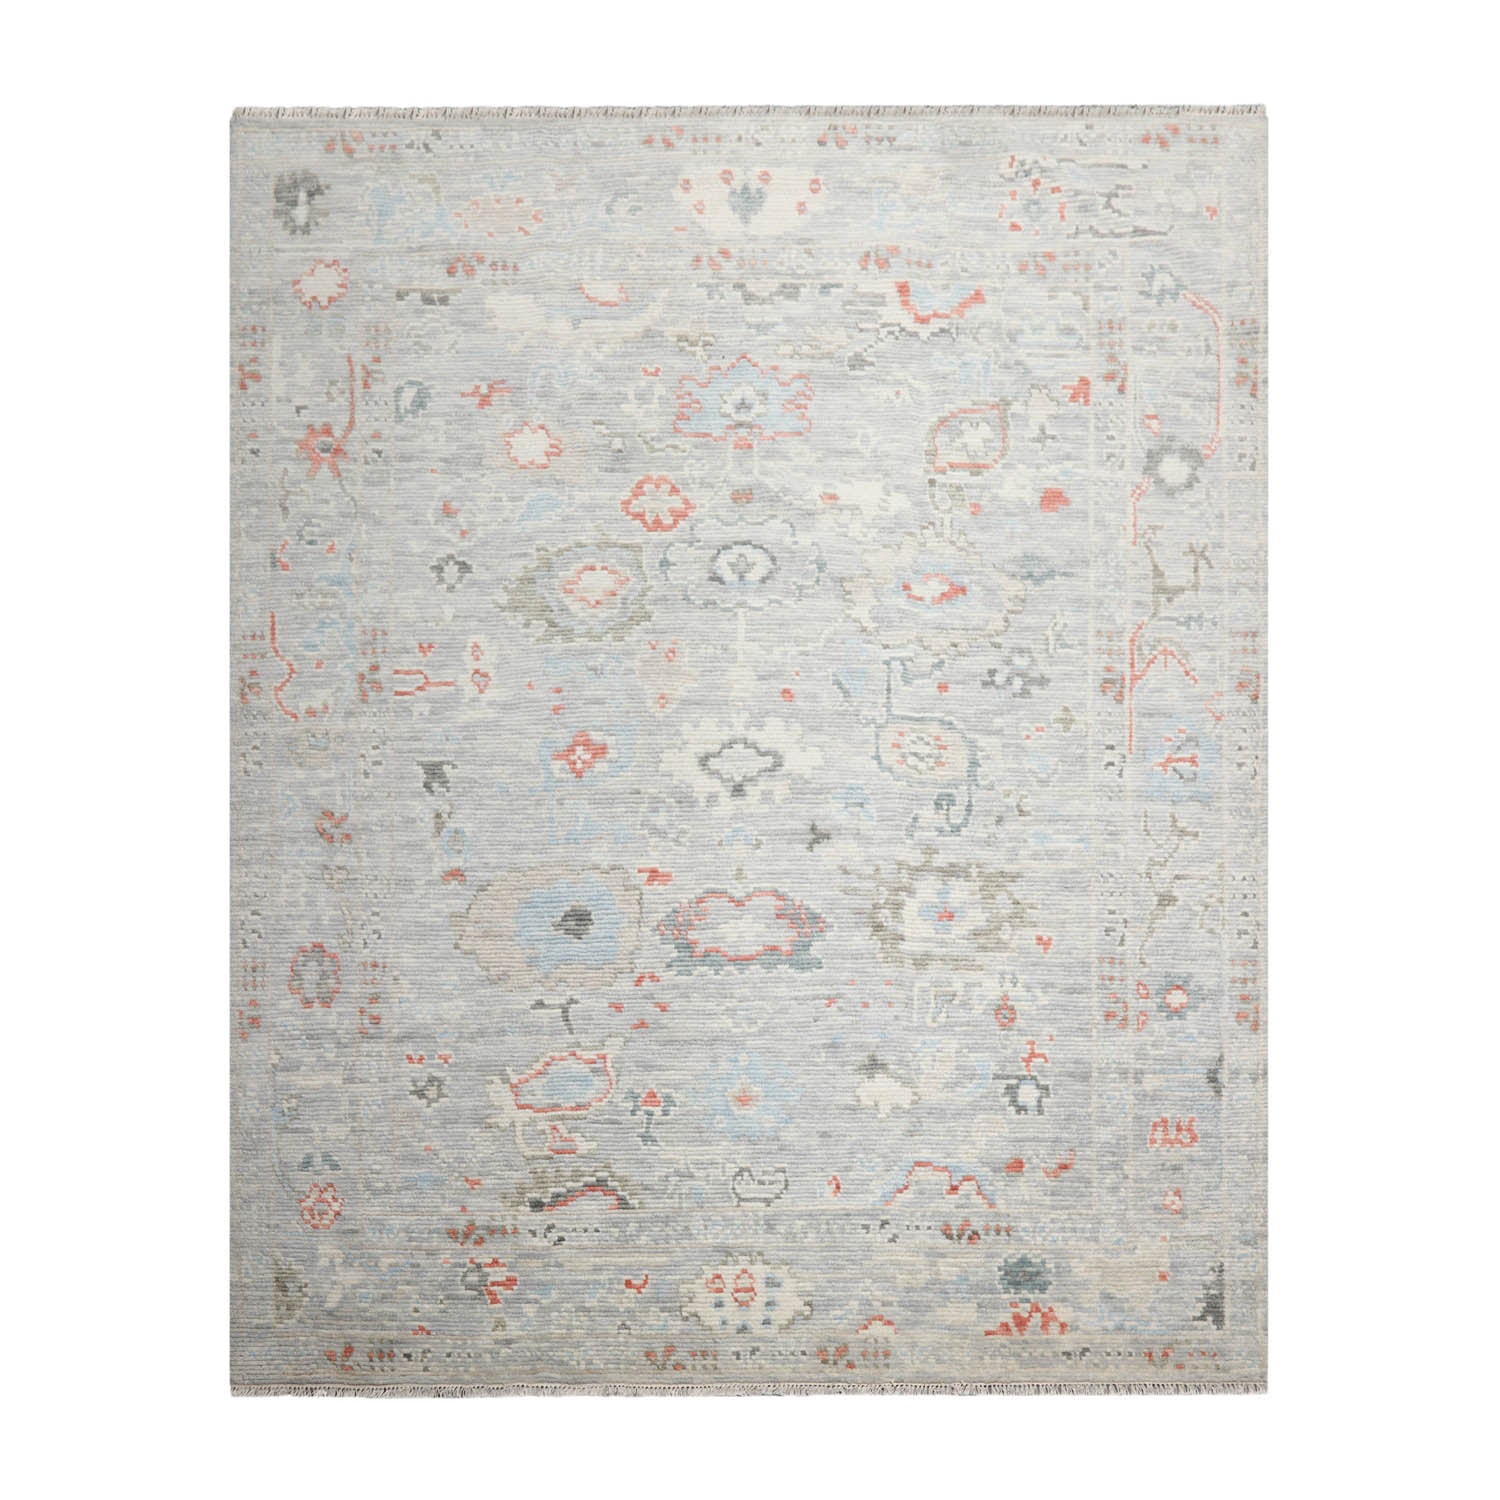 Natalise LoomBloom 8x10 Gray, Ivory Hand Knotted Oushak 100% Wool Oushak Traditional Oriental Area Rug